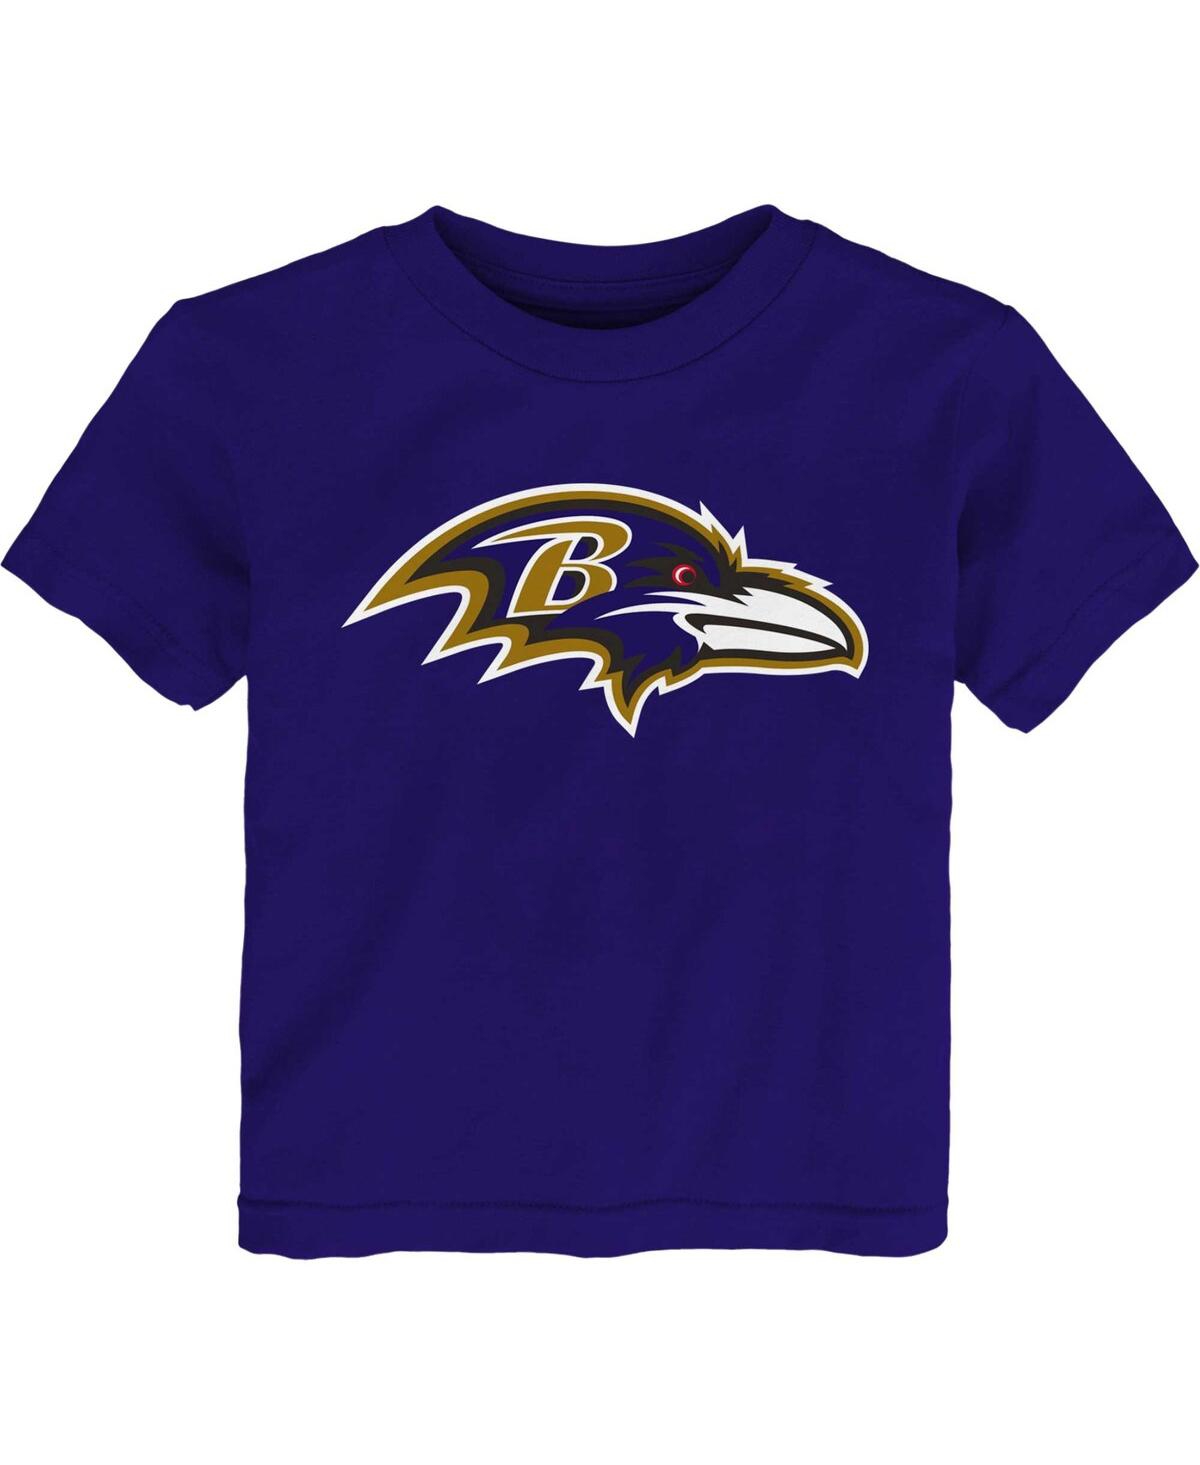 Outerstuff Babies' Toddler Boys And Girls Purple Baltimore Ravens Primary Logo T-shirt